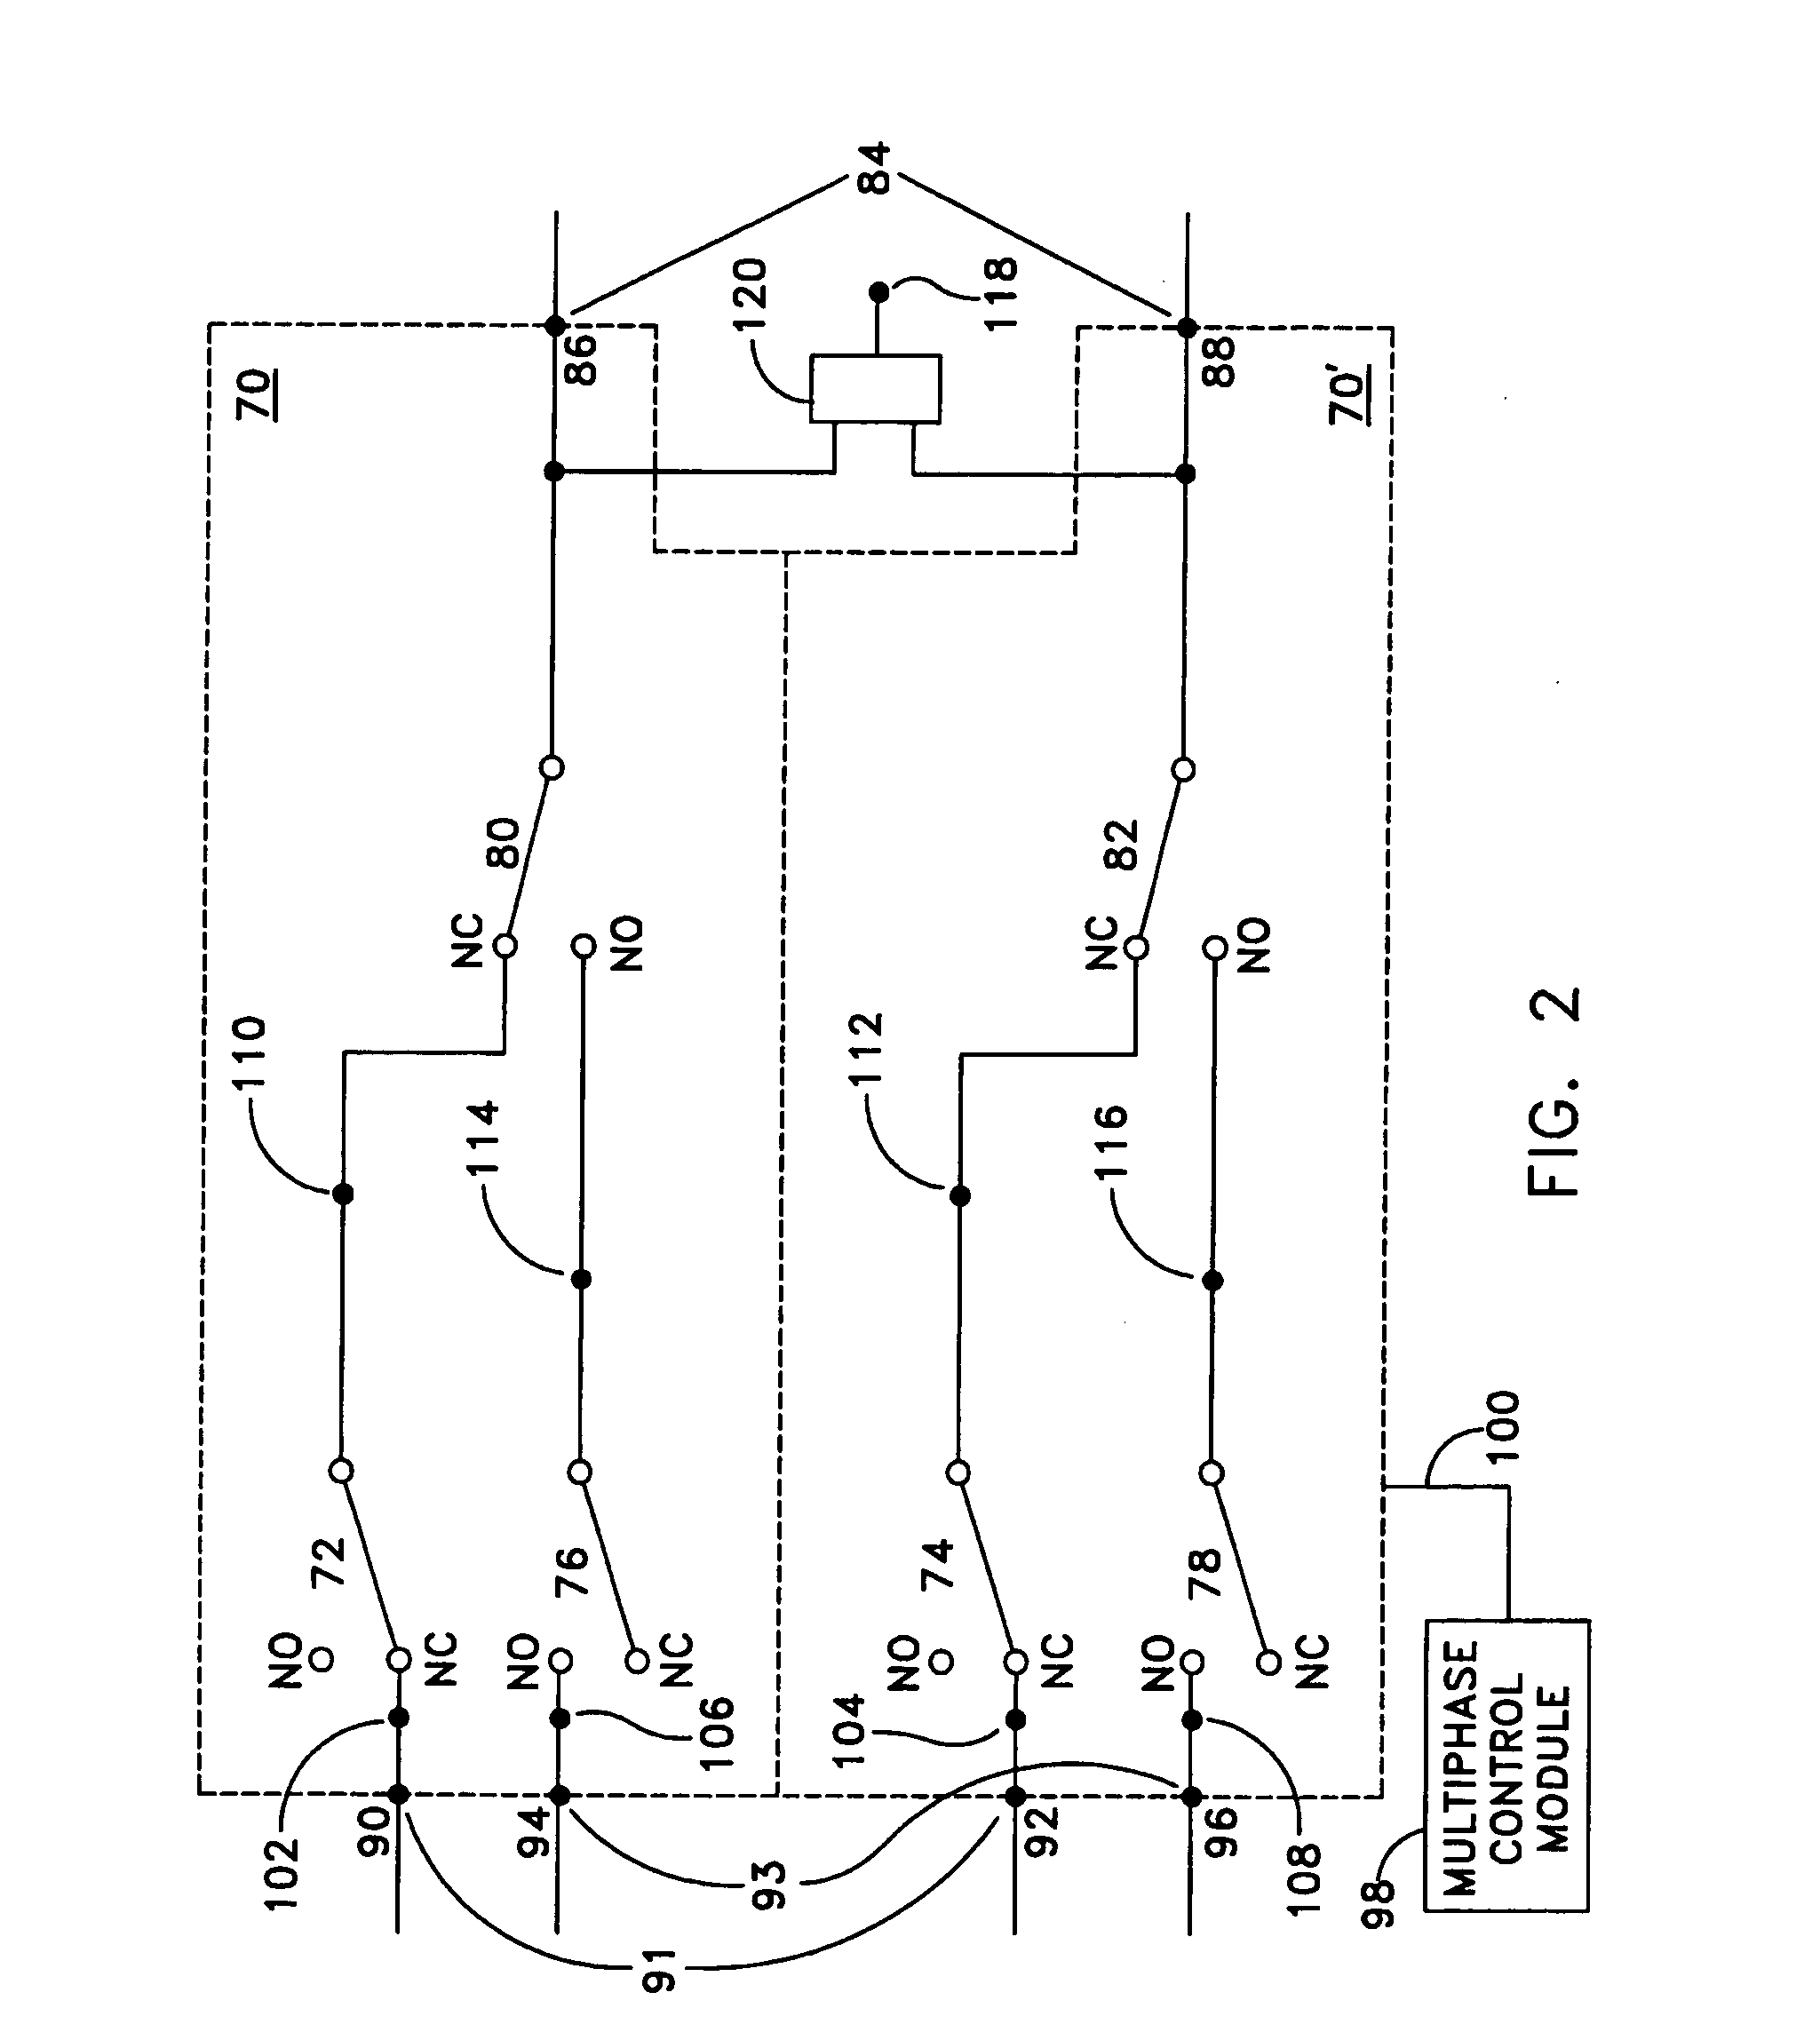 Apparatus and method for preventing an electrical backfeed